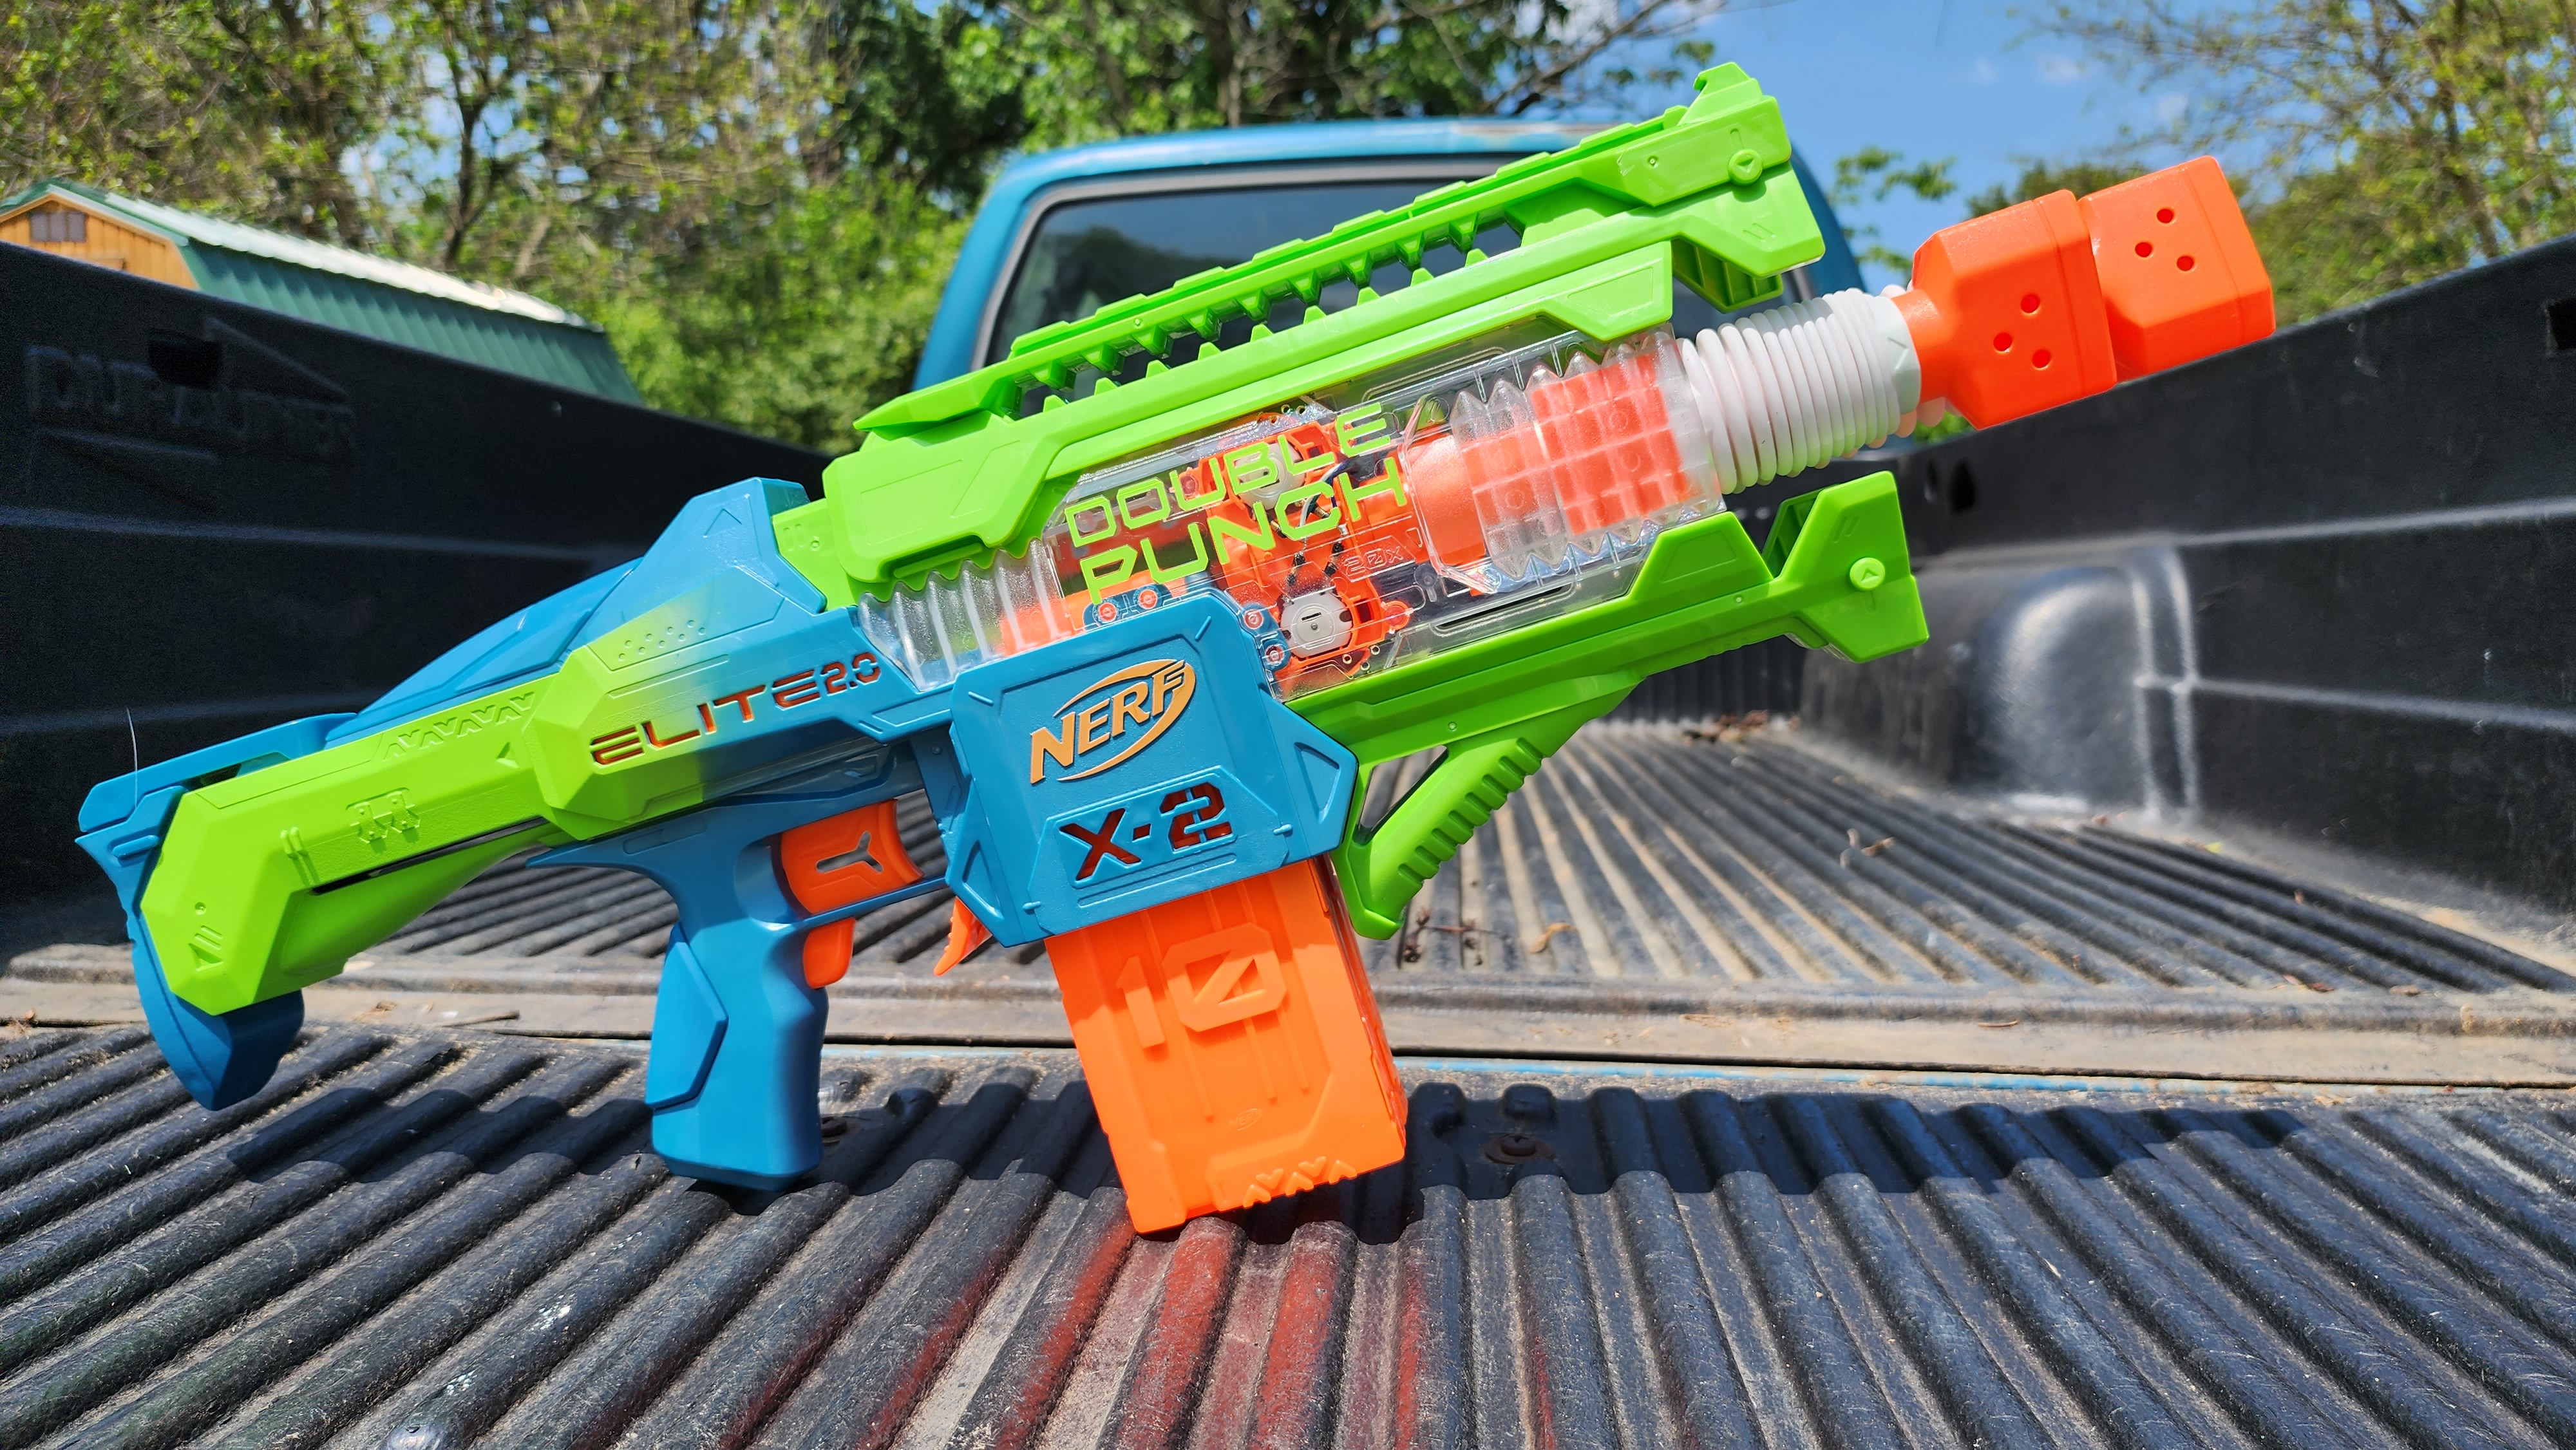 NERF Elite 2.0 DOUBLE PUNCH - Full Review - Firing Demo and FPS